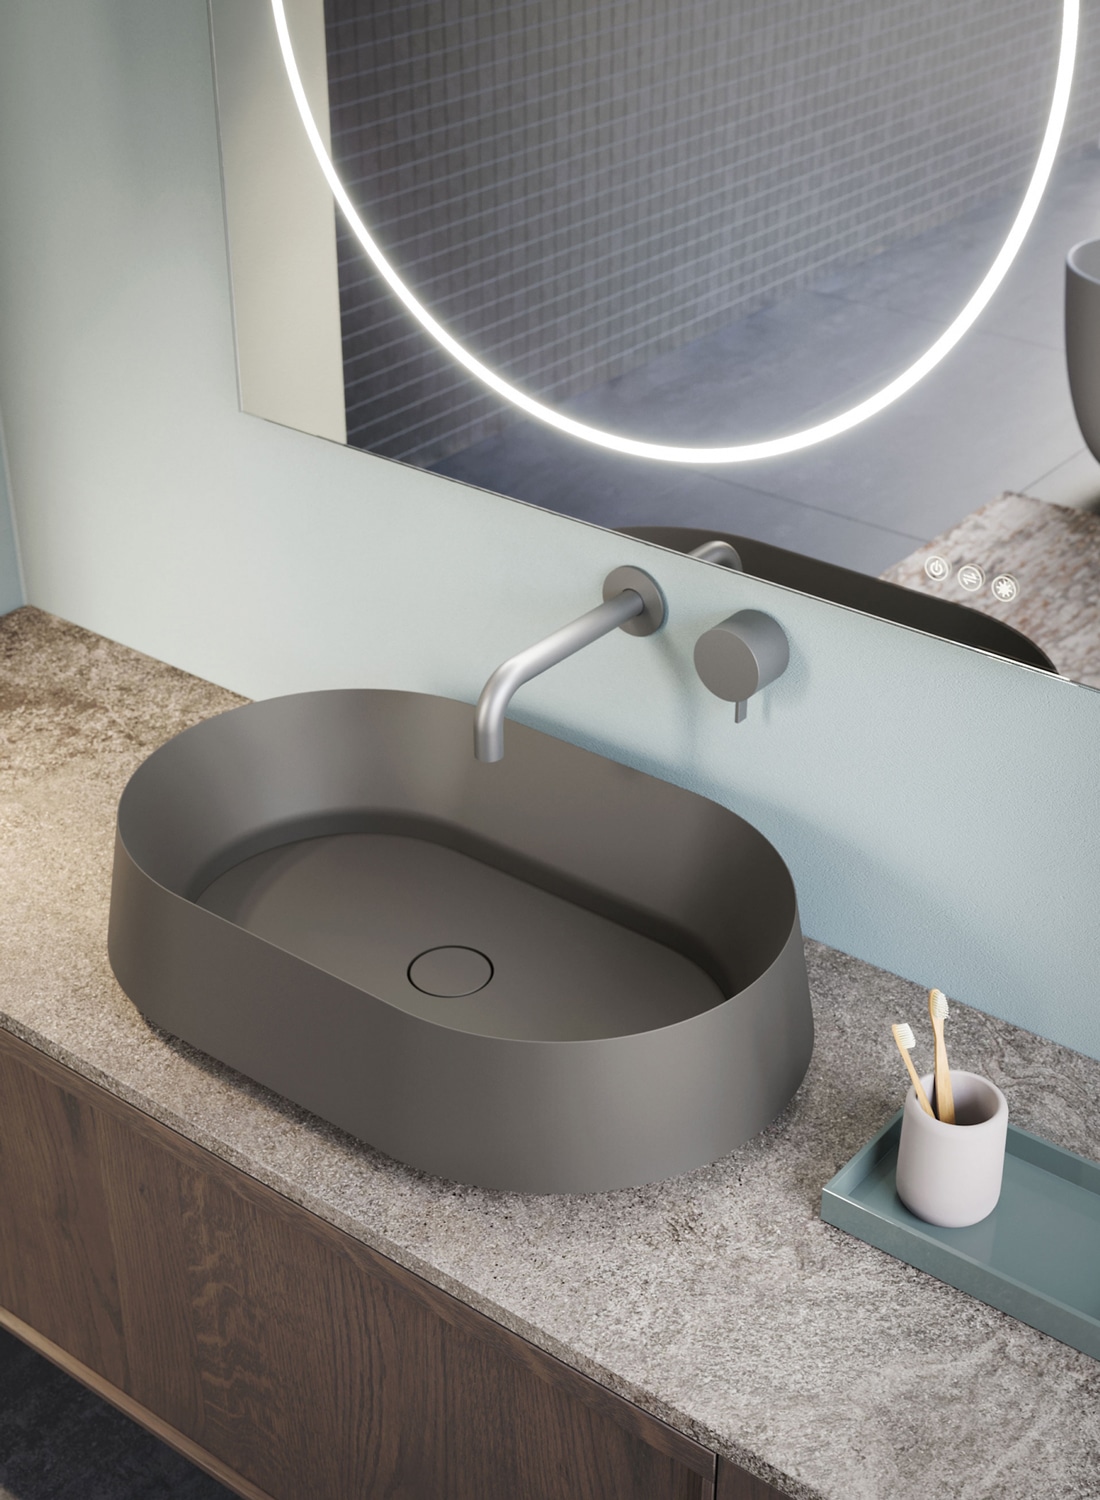 The Vulcan washbasins are available in two sizes.